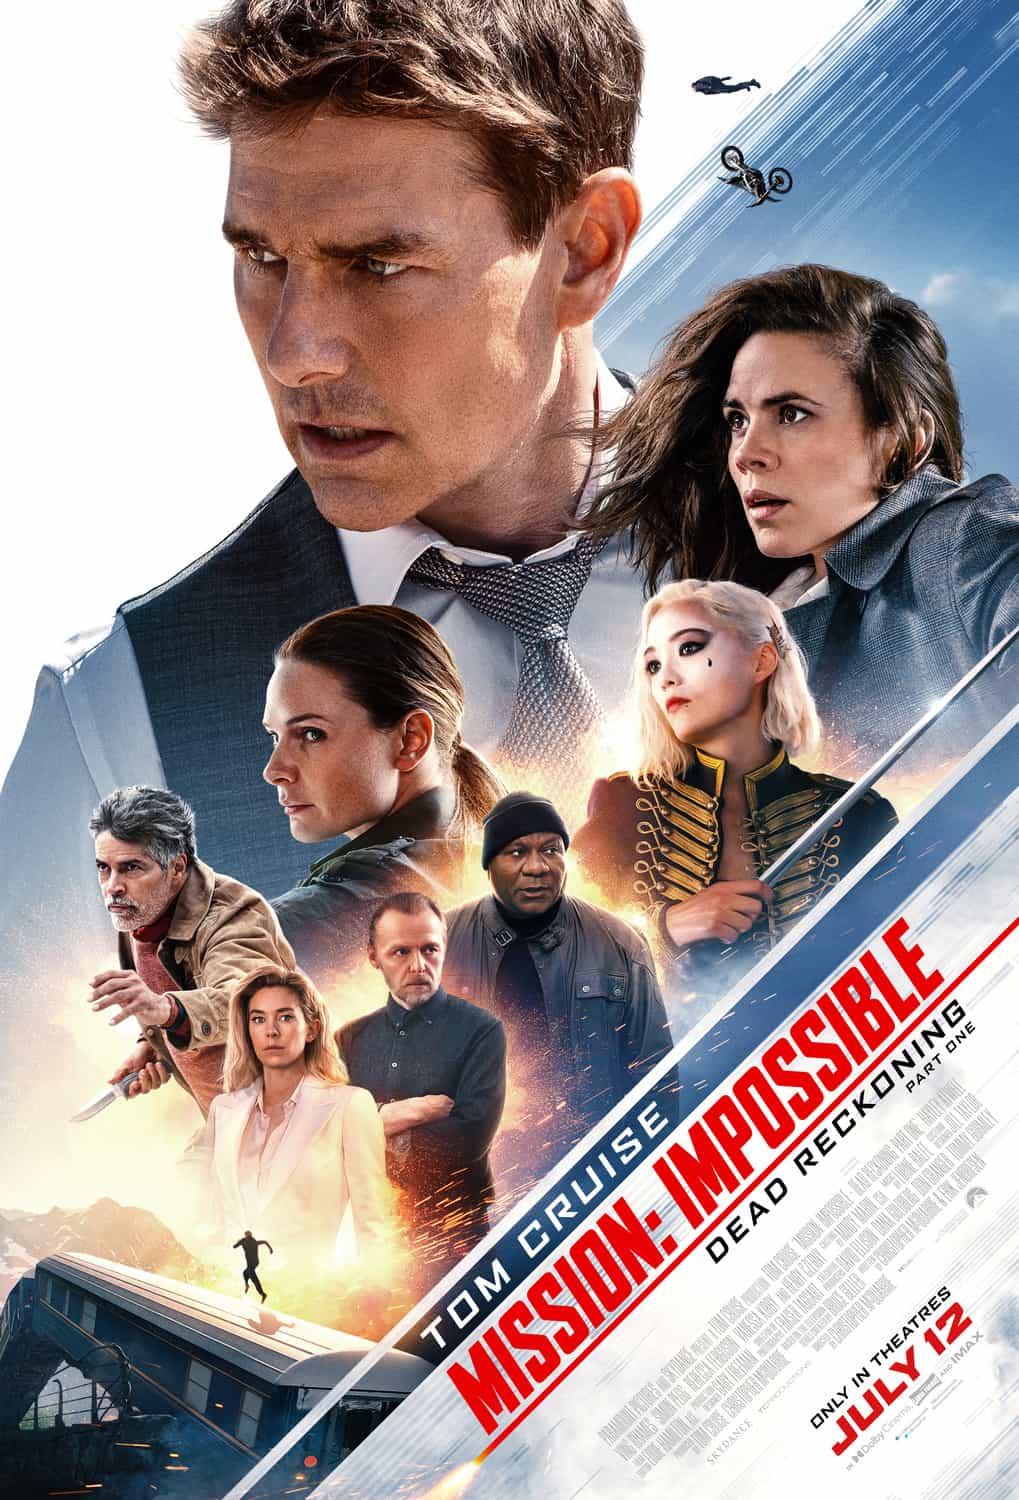 Mission:Impossible - Dead Reckoning Part 1 has been given a 12A age rating in the UK for moderate violence, threat